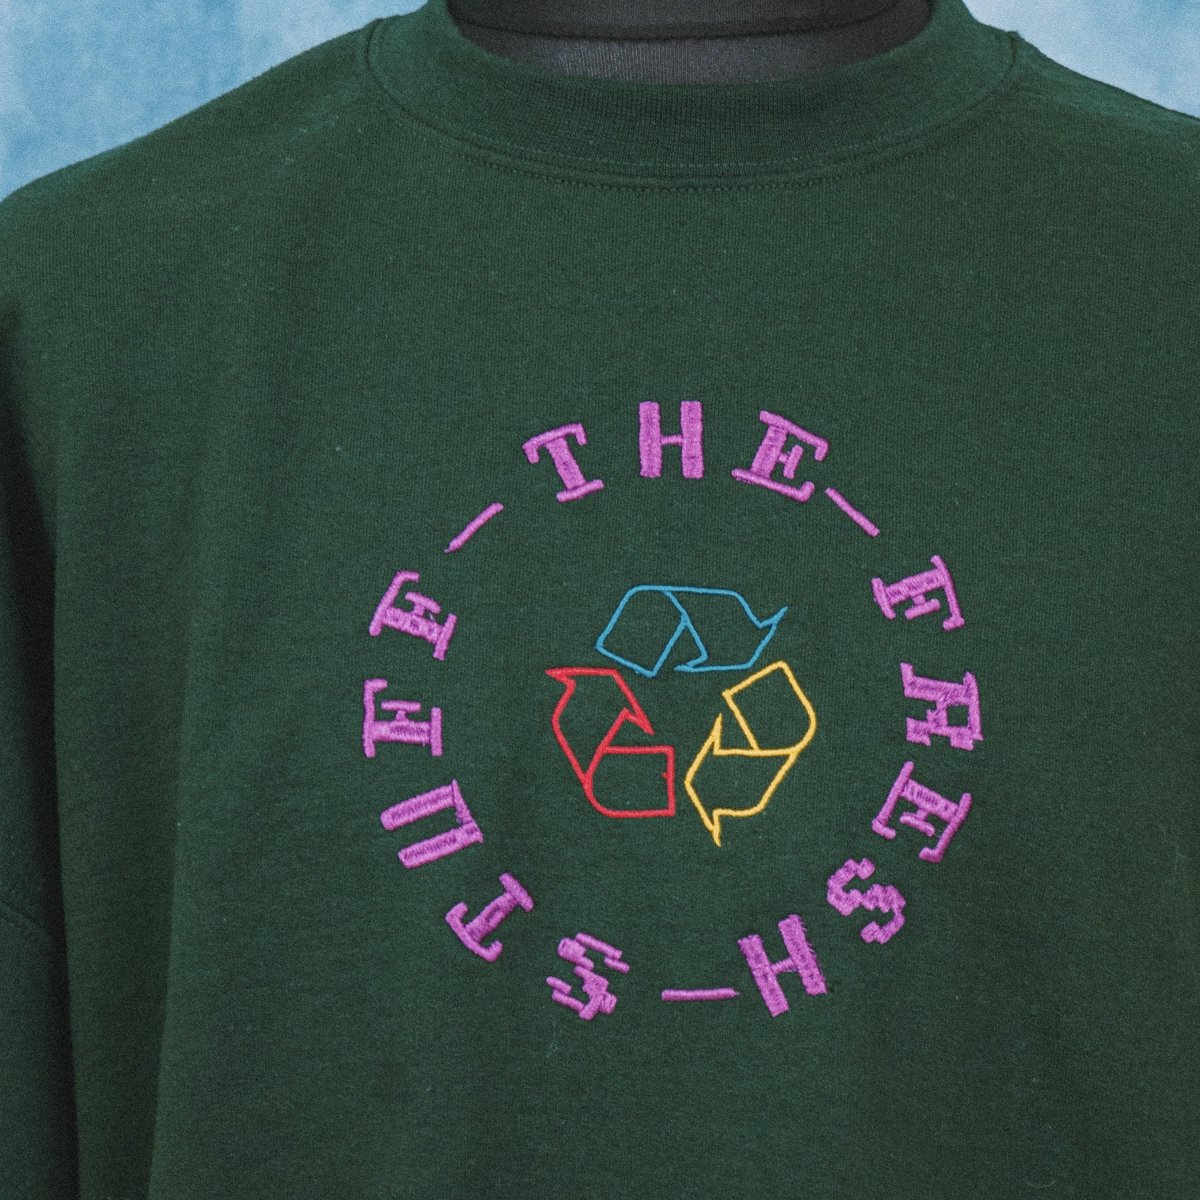 'TFS Recycling' Embroidered Sweater